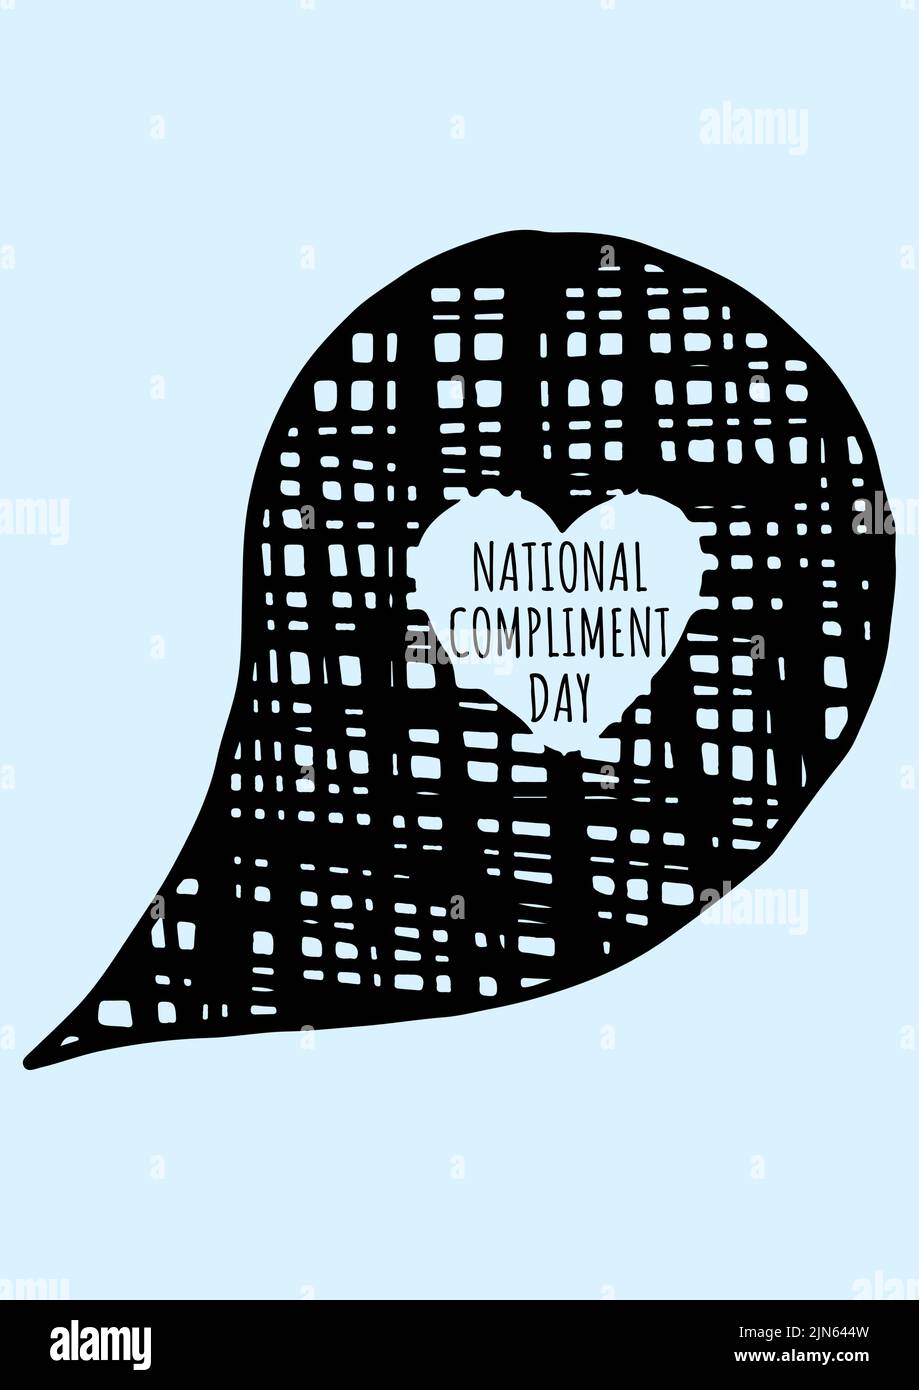 Composition of national compliment day text in speech bubble on blue backgorund Stock Photo